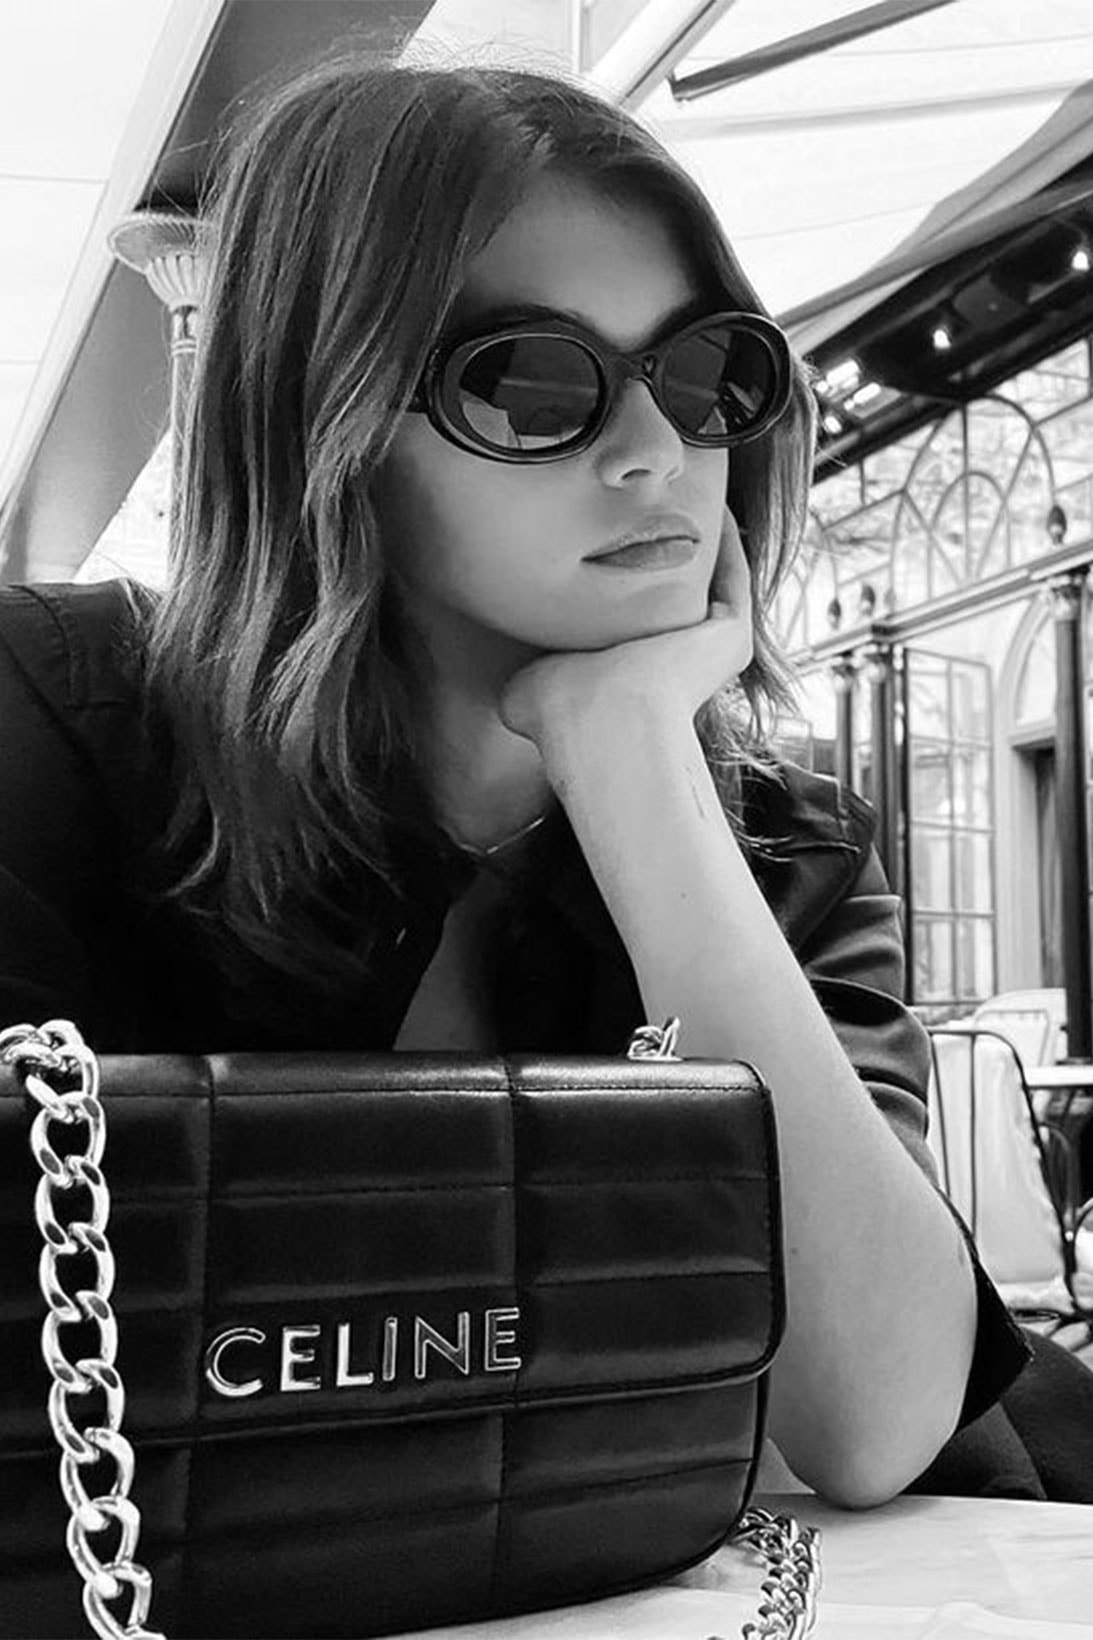 Lisa From BLACKPINK And Kaia Gerber Tapped To Launch New Celine Campaign -  A&E Magazine